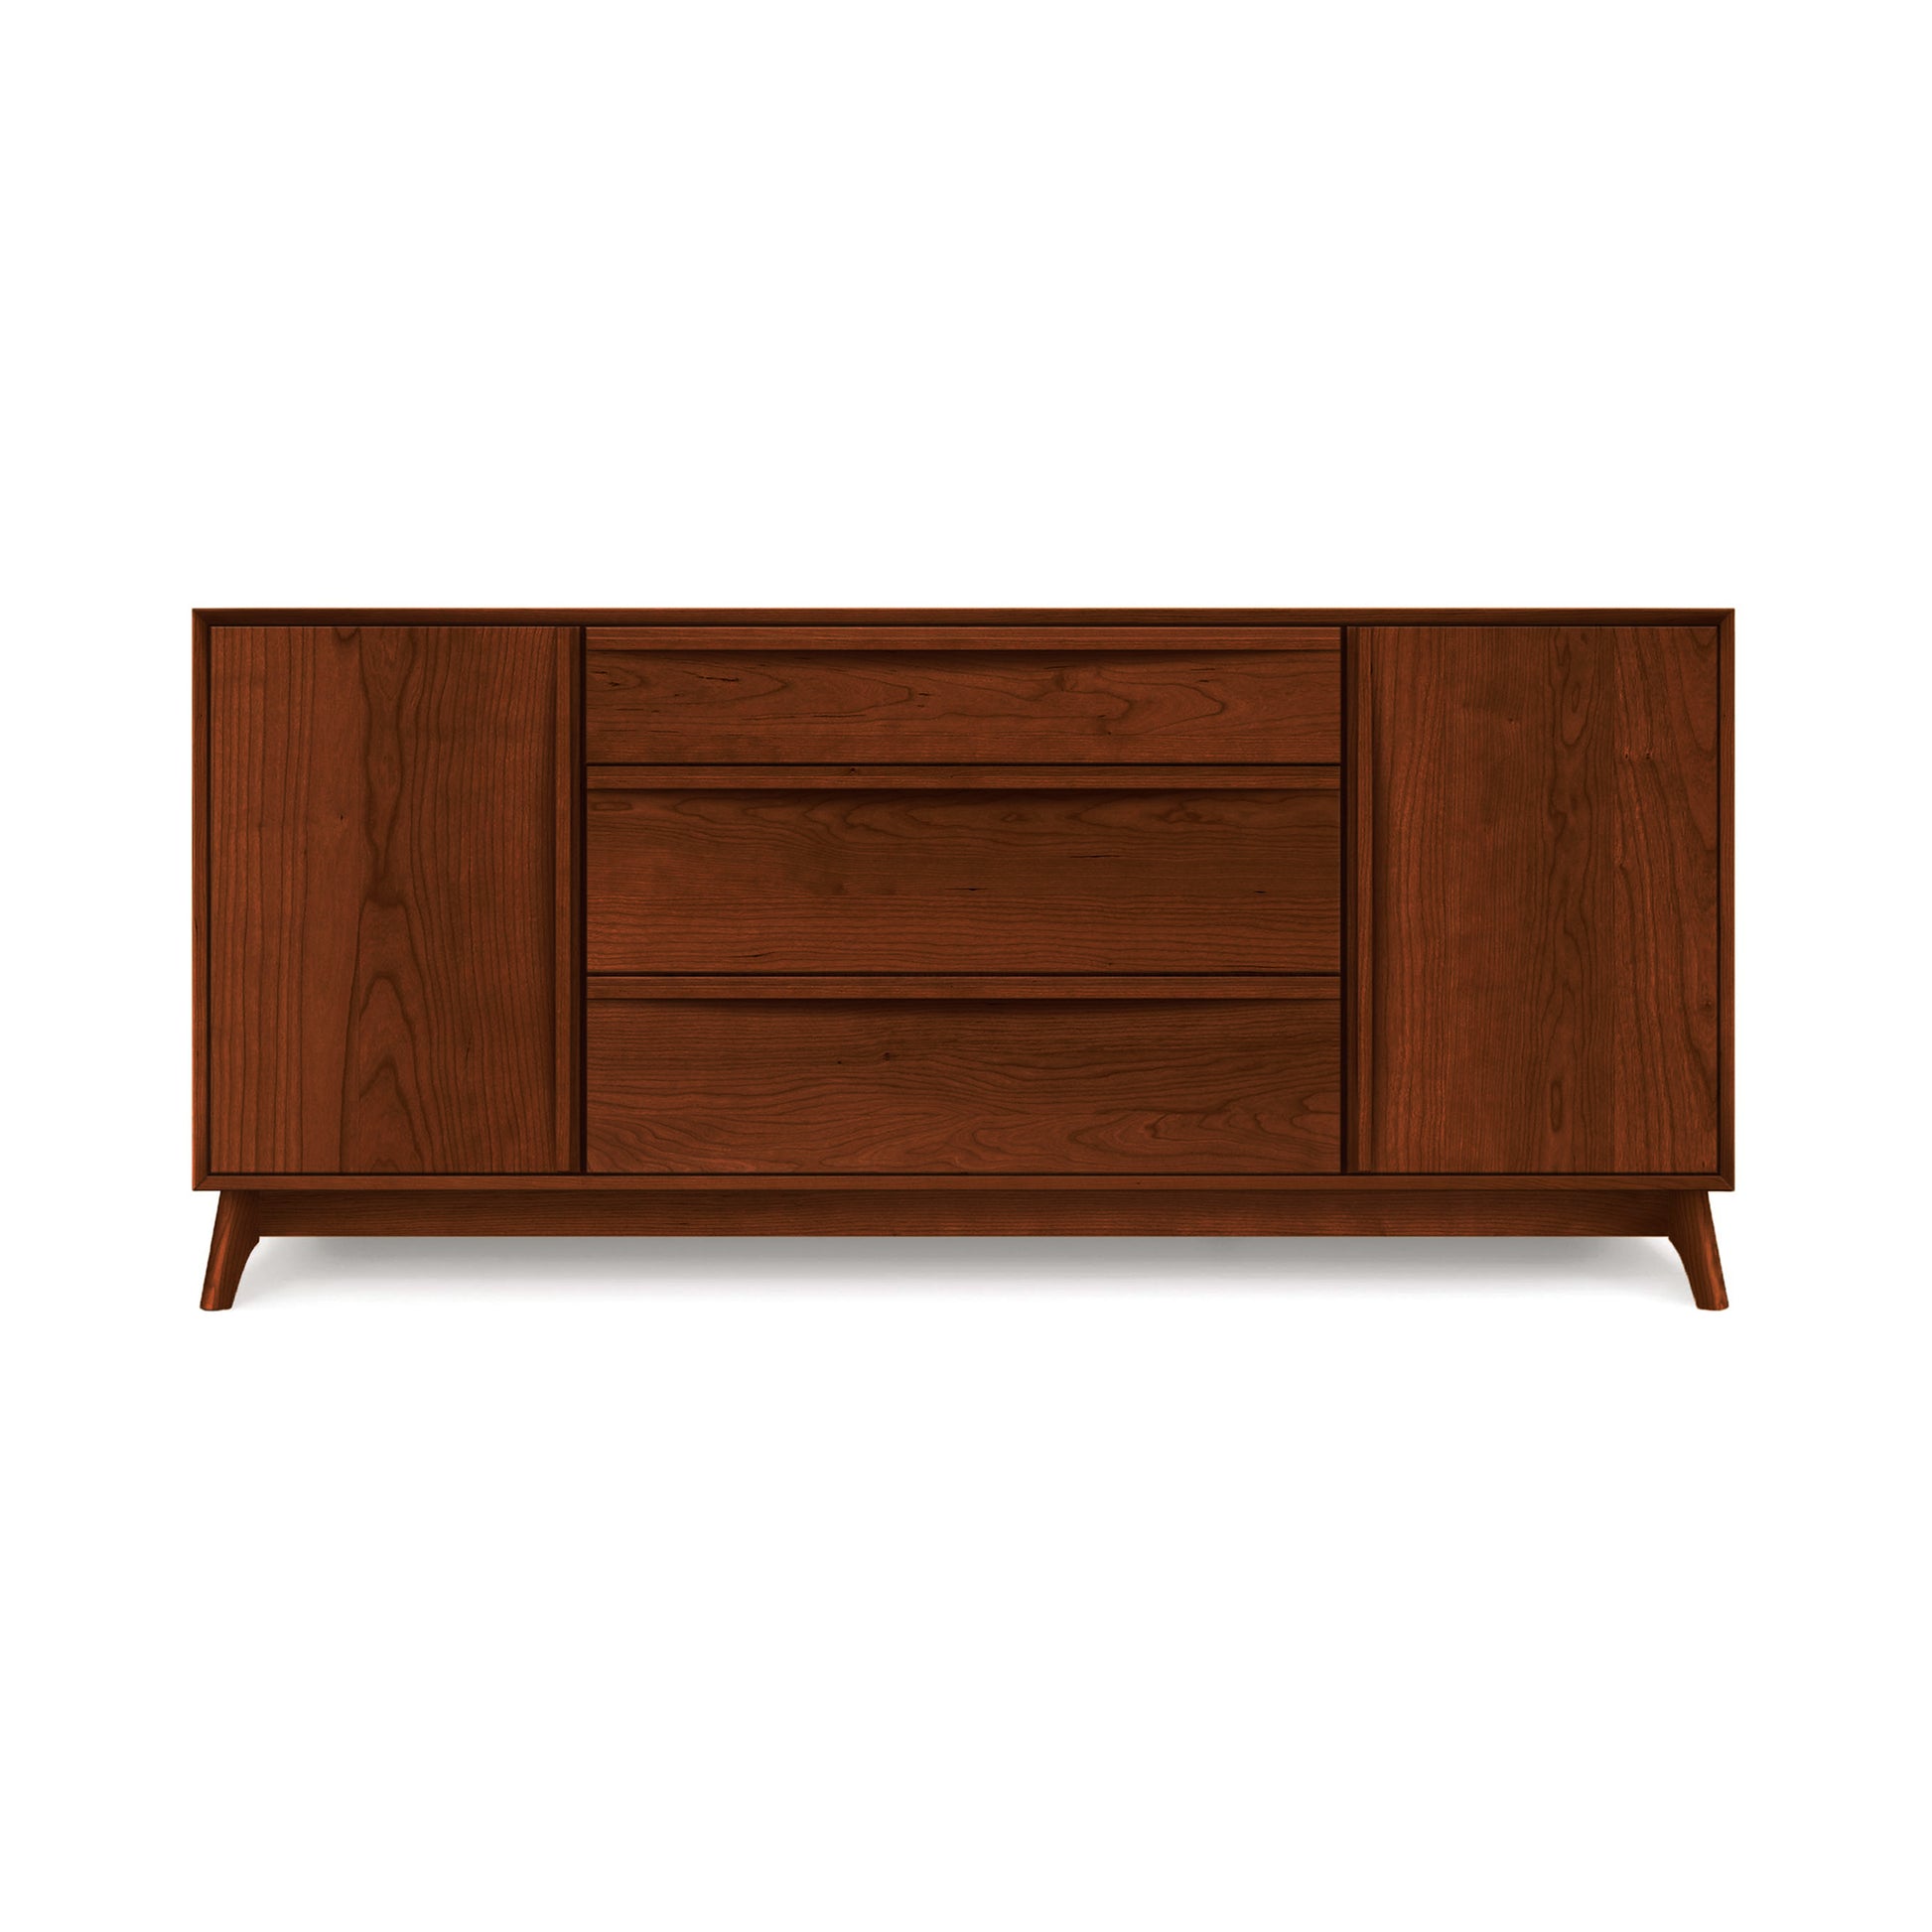 A Copeland Furniture Catalina 3-Drawers, 2-Door Buffet, made from solid wood with three drawers and two side doors, standing on angled legs, isolated on a white background.